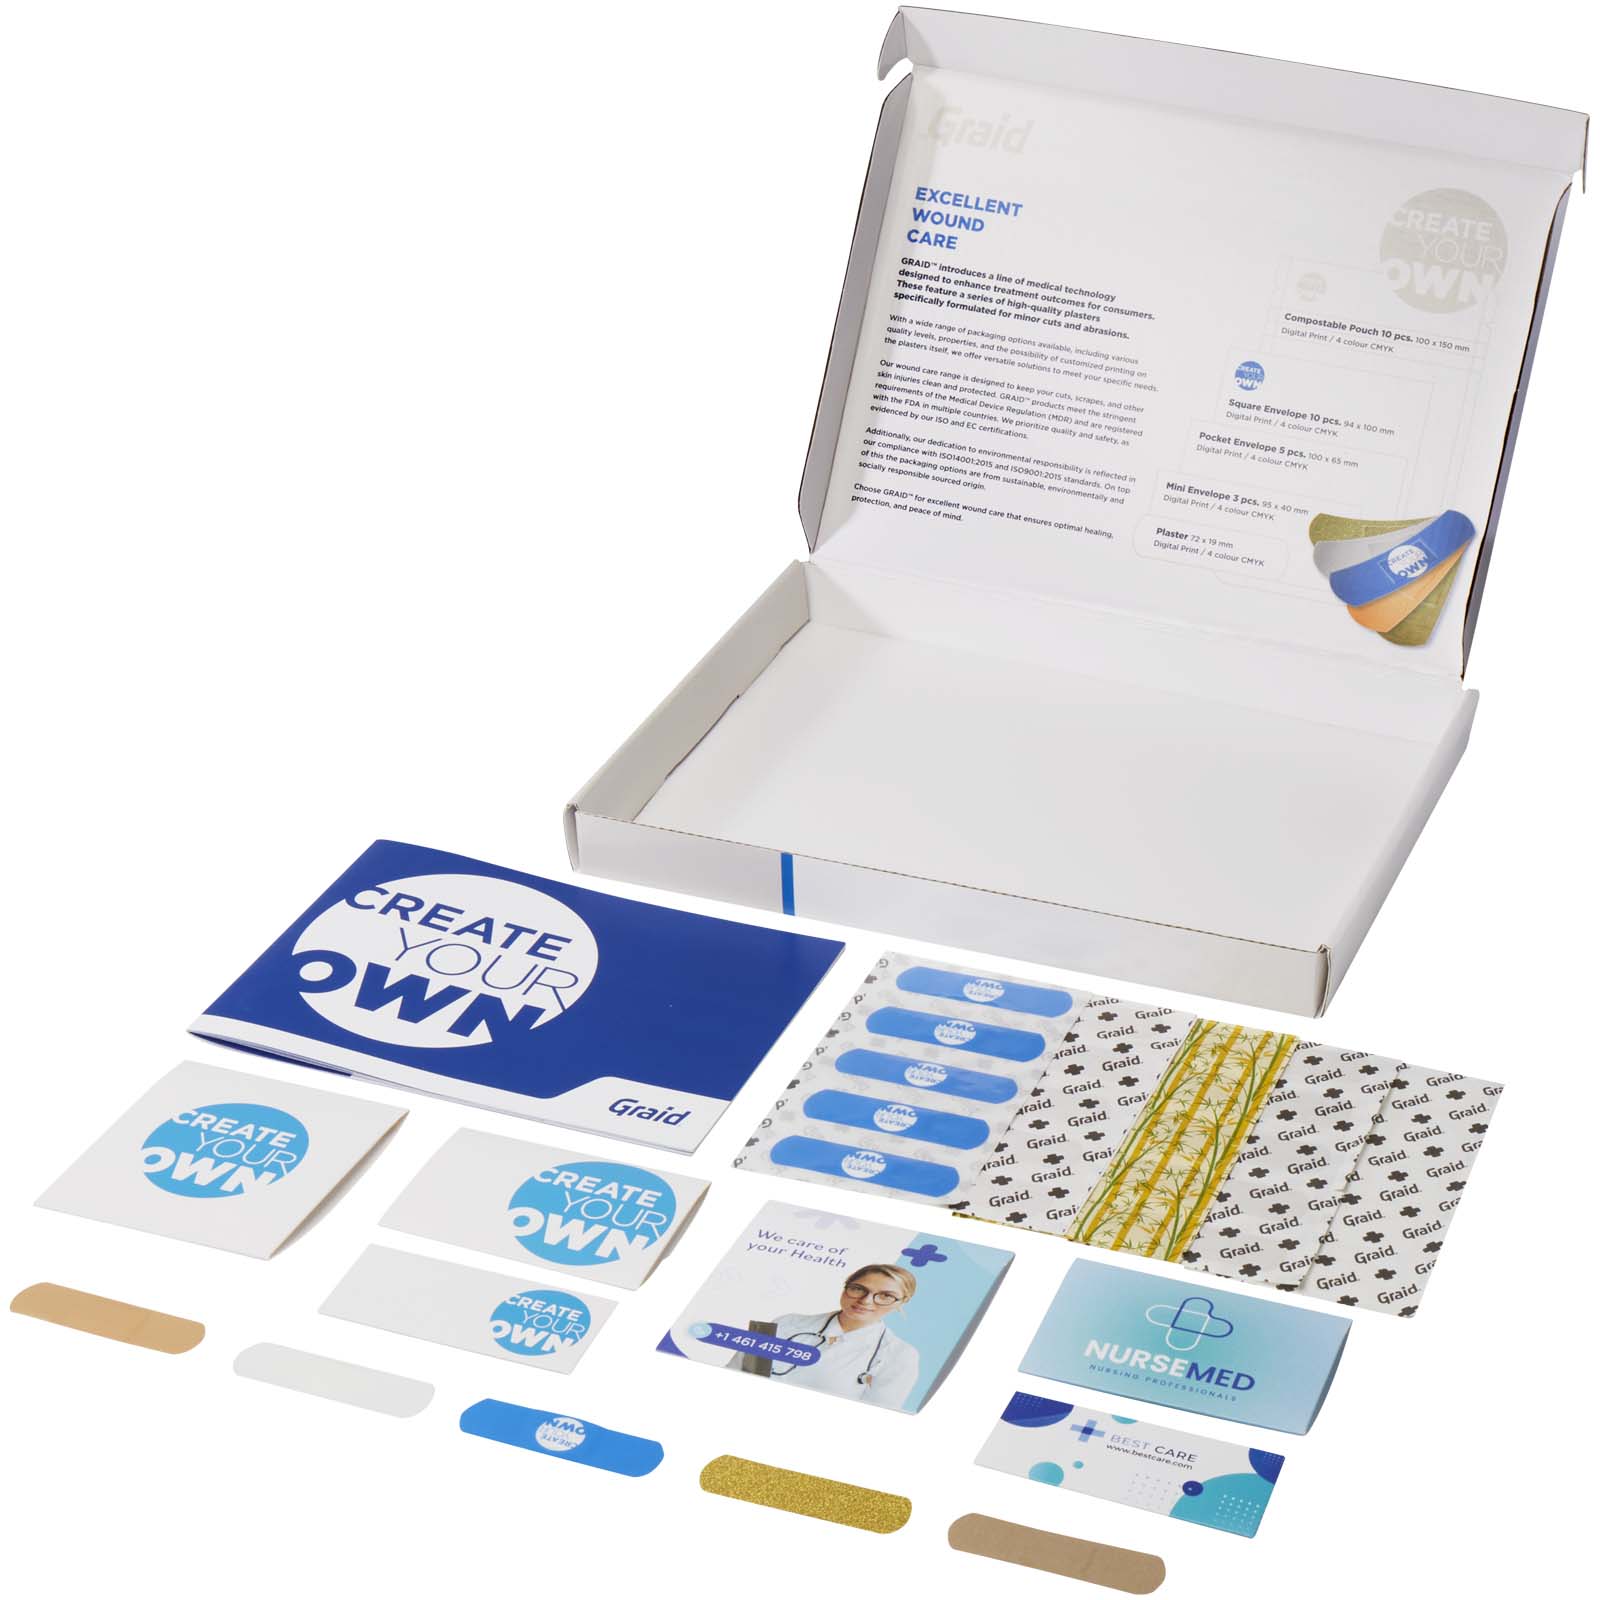 Advertising First Aid Kits - Plaster sample box  - 1